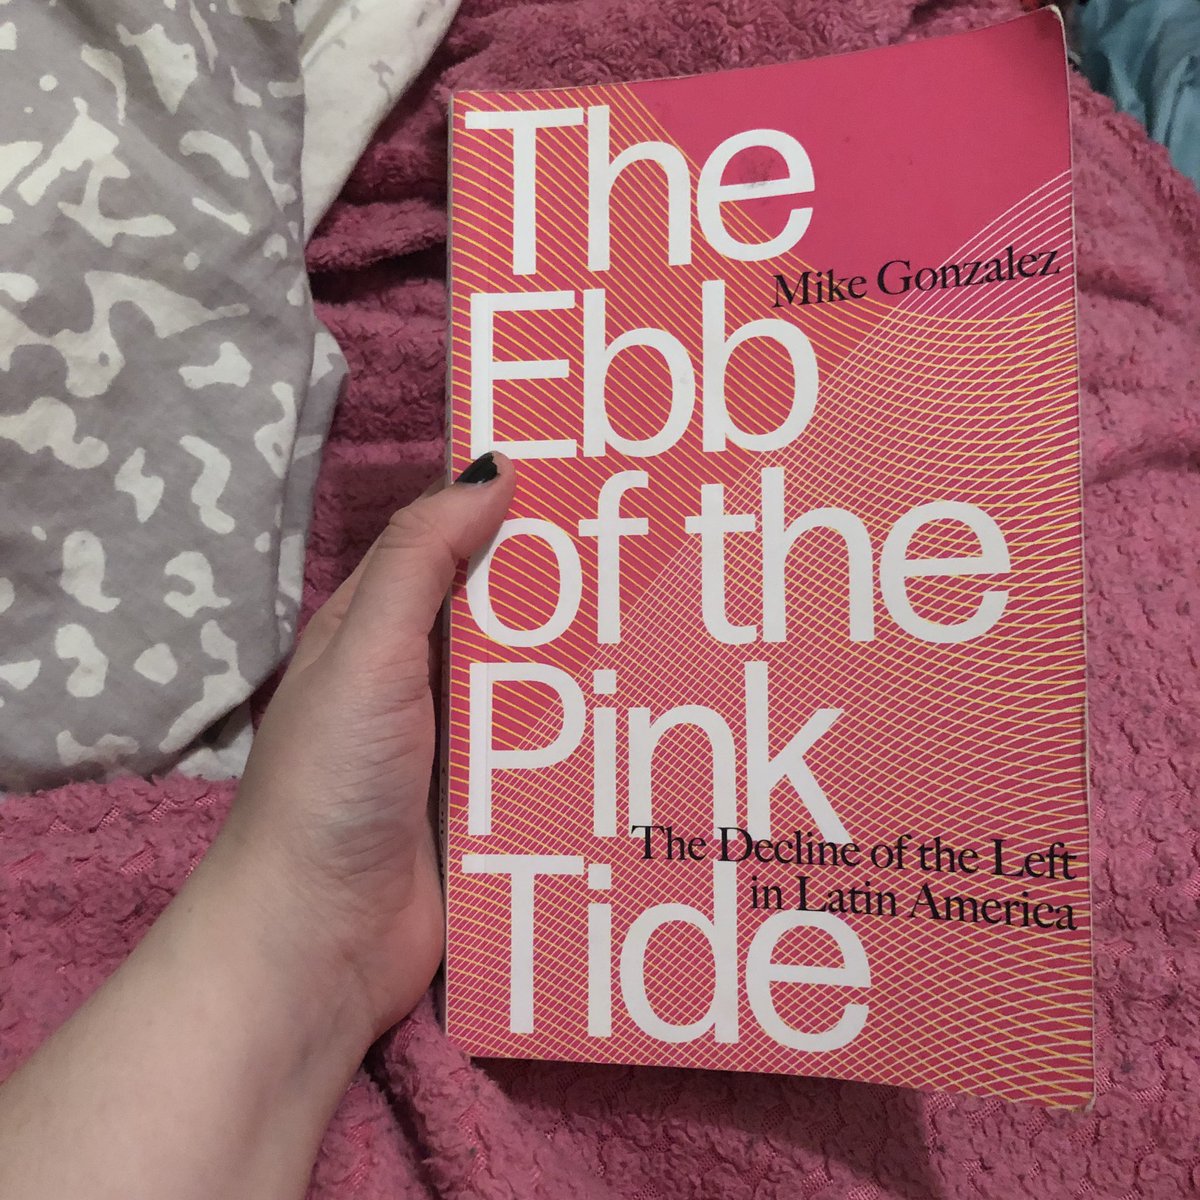 12. The Ebb of the Pink Tide: The Decline of the Left in Latin America - Mike Gonzalez